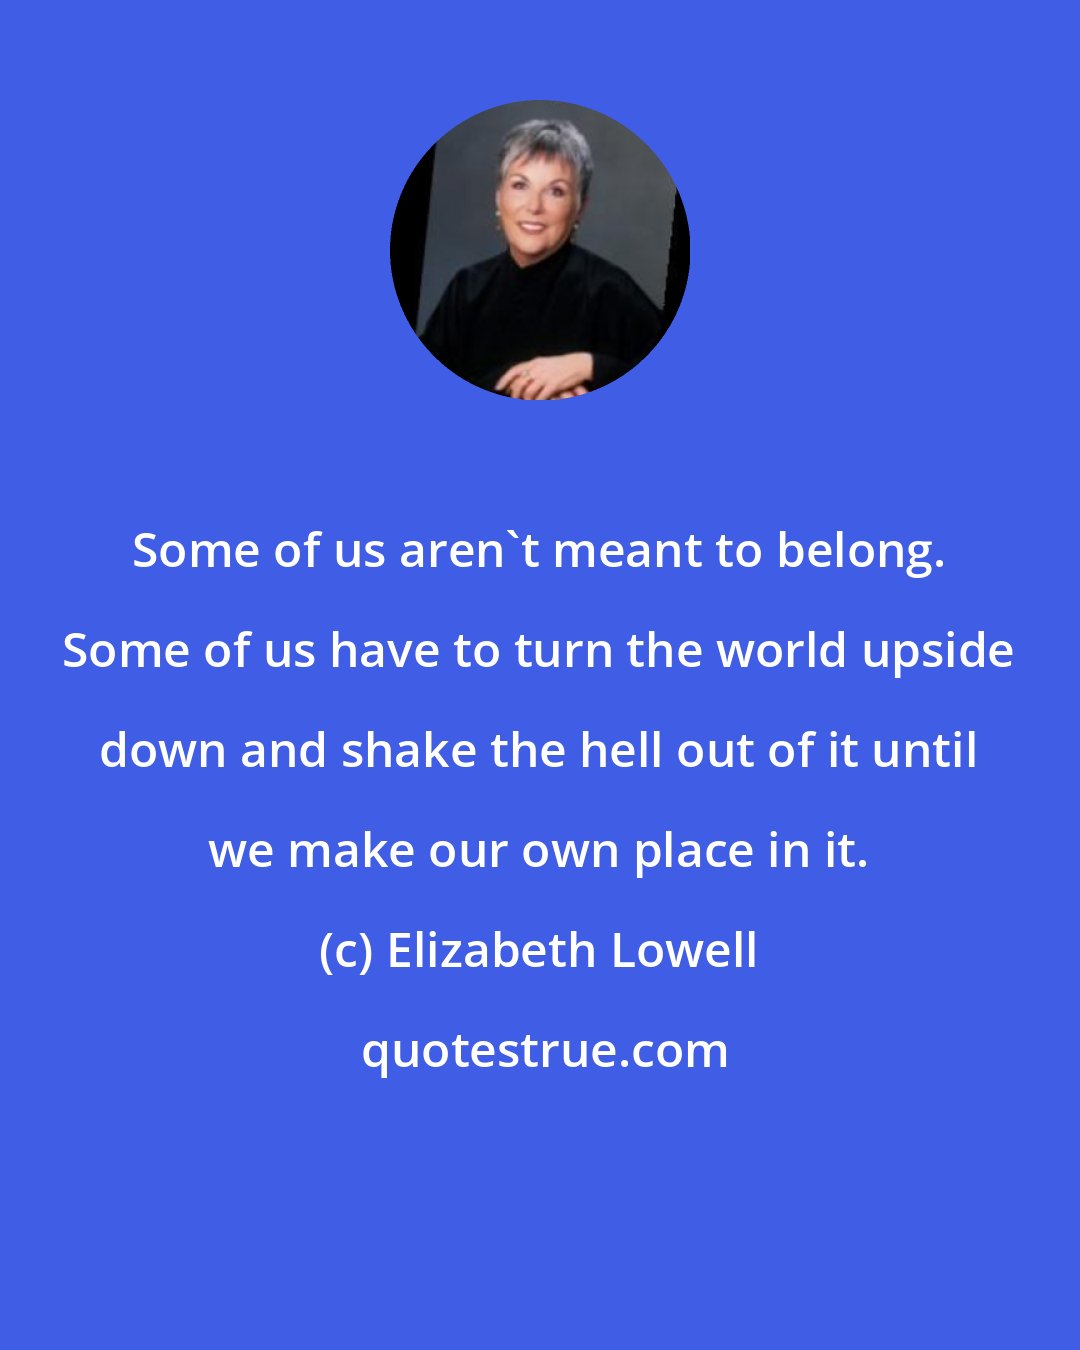 Elizabeth Lowell: Some of us aren't meant to belong. Some of us have to turn the world upside down and shake the hell out of it until we make our own place in it.